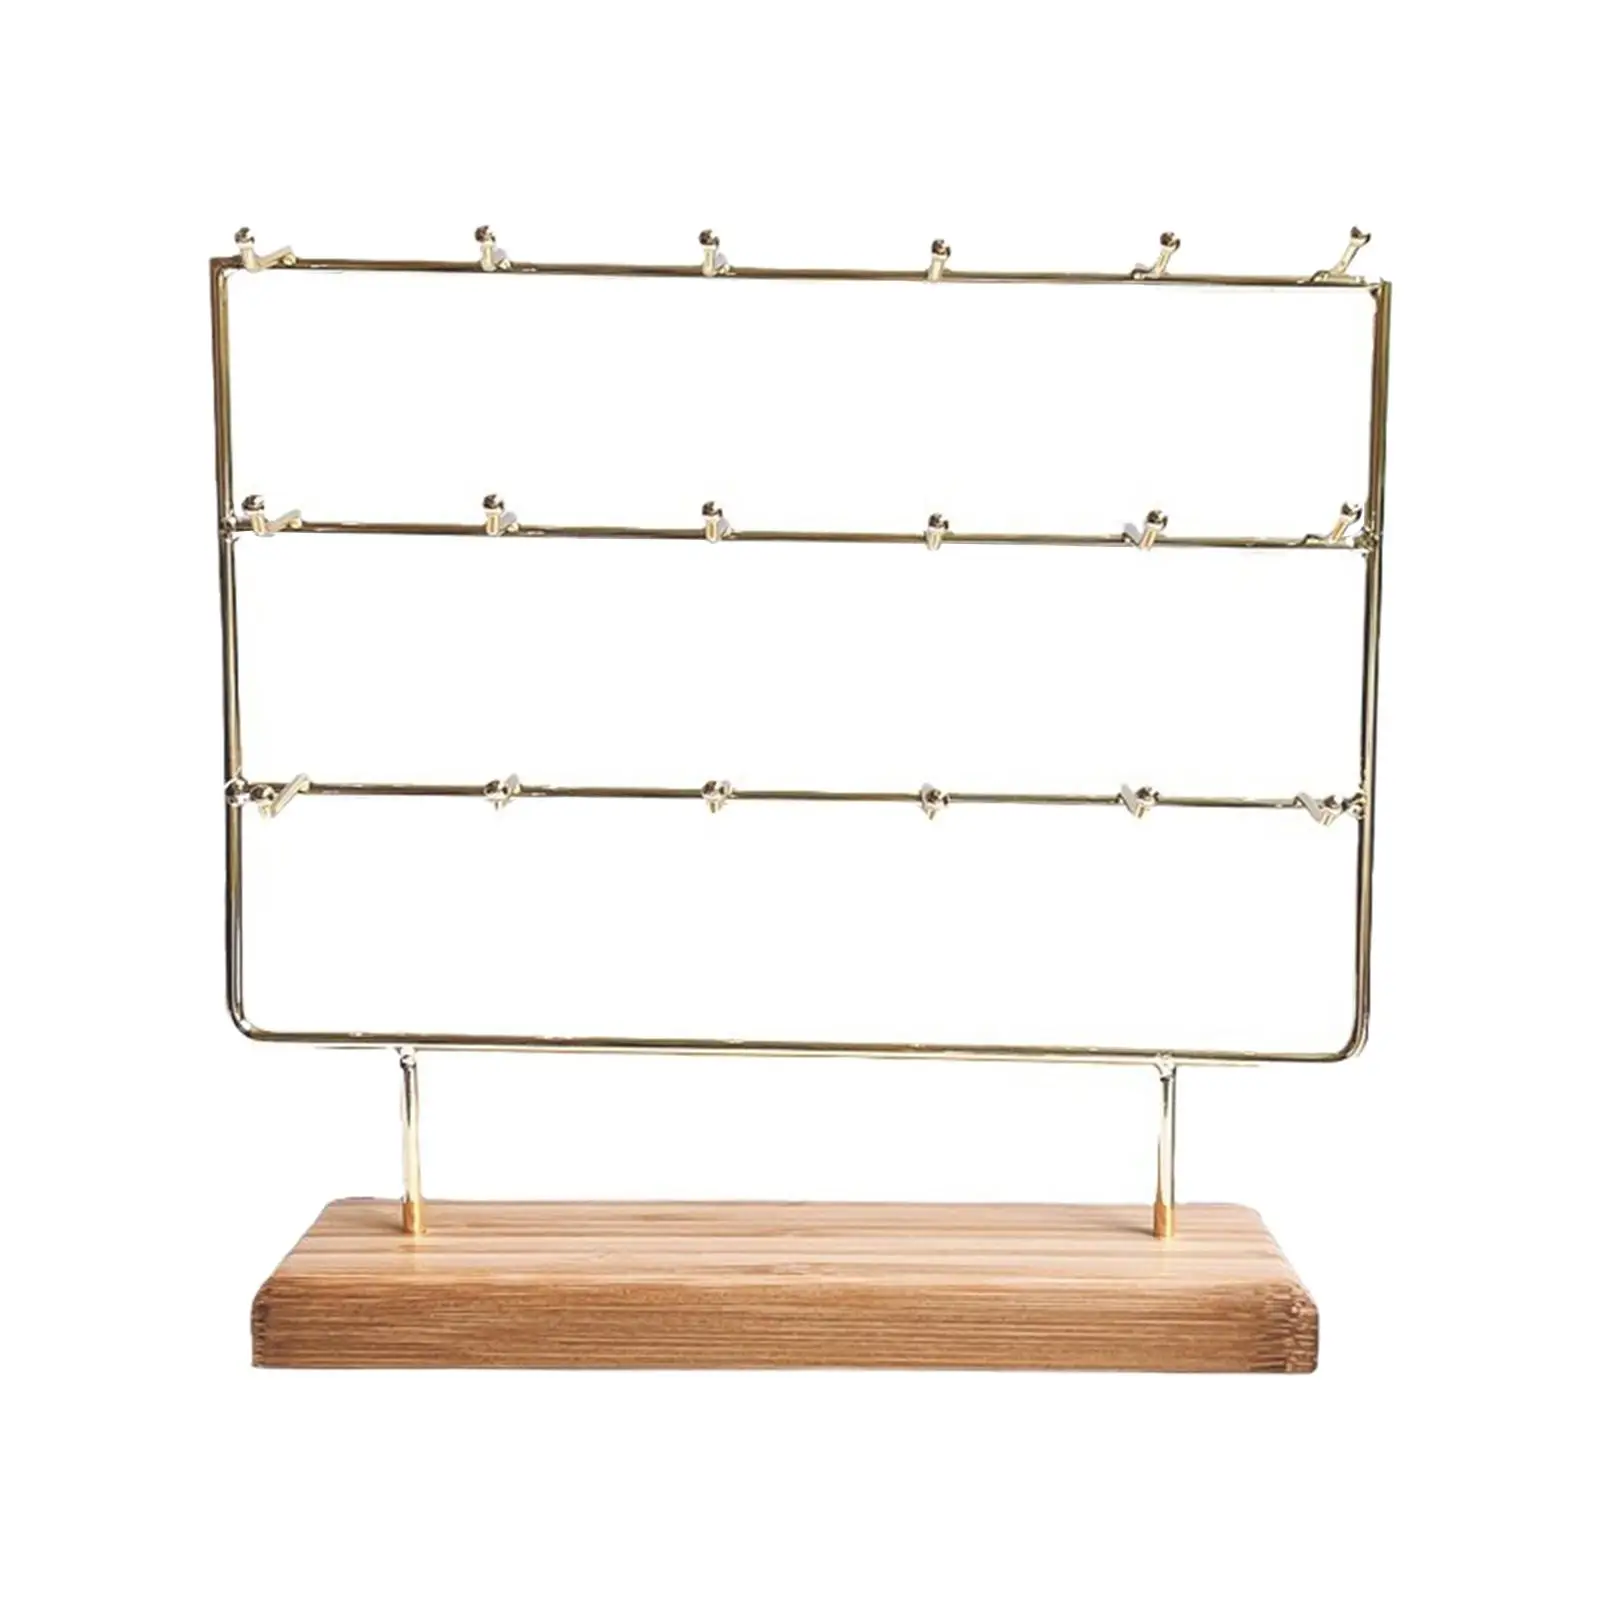 Jewelry Display Stand Rack Stylish Bracelet Watch Holder for Jewelry Shop Shopping Mall Tabletop Live Broadcasting Dresser